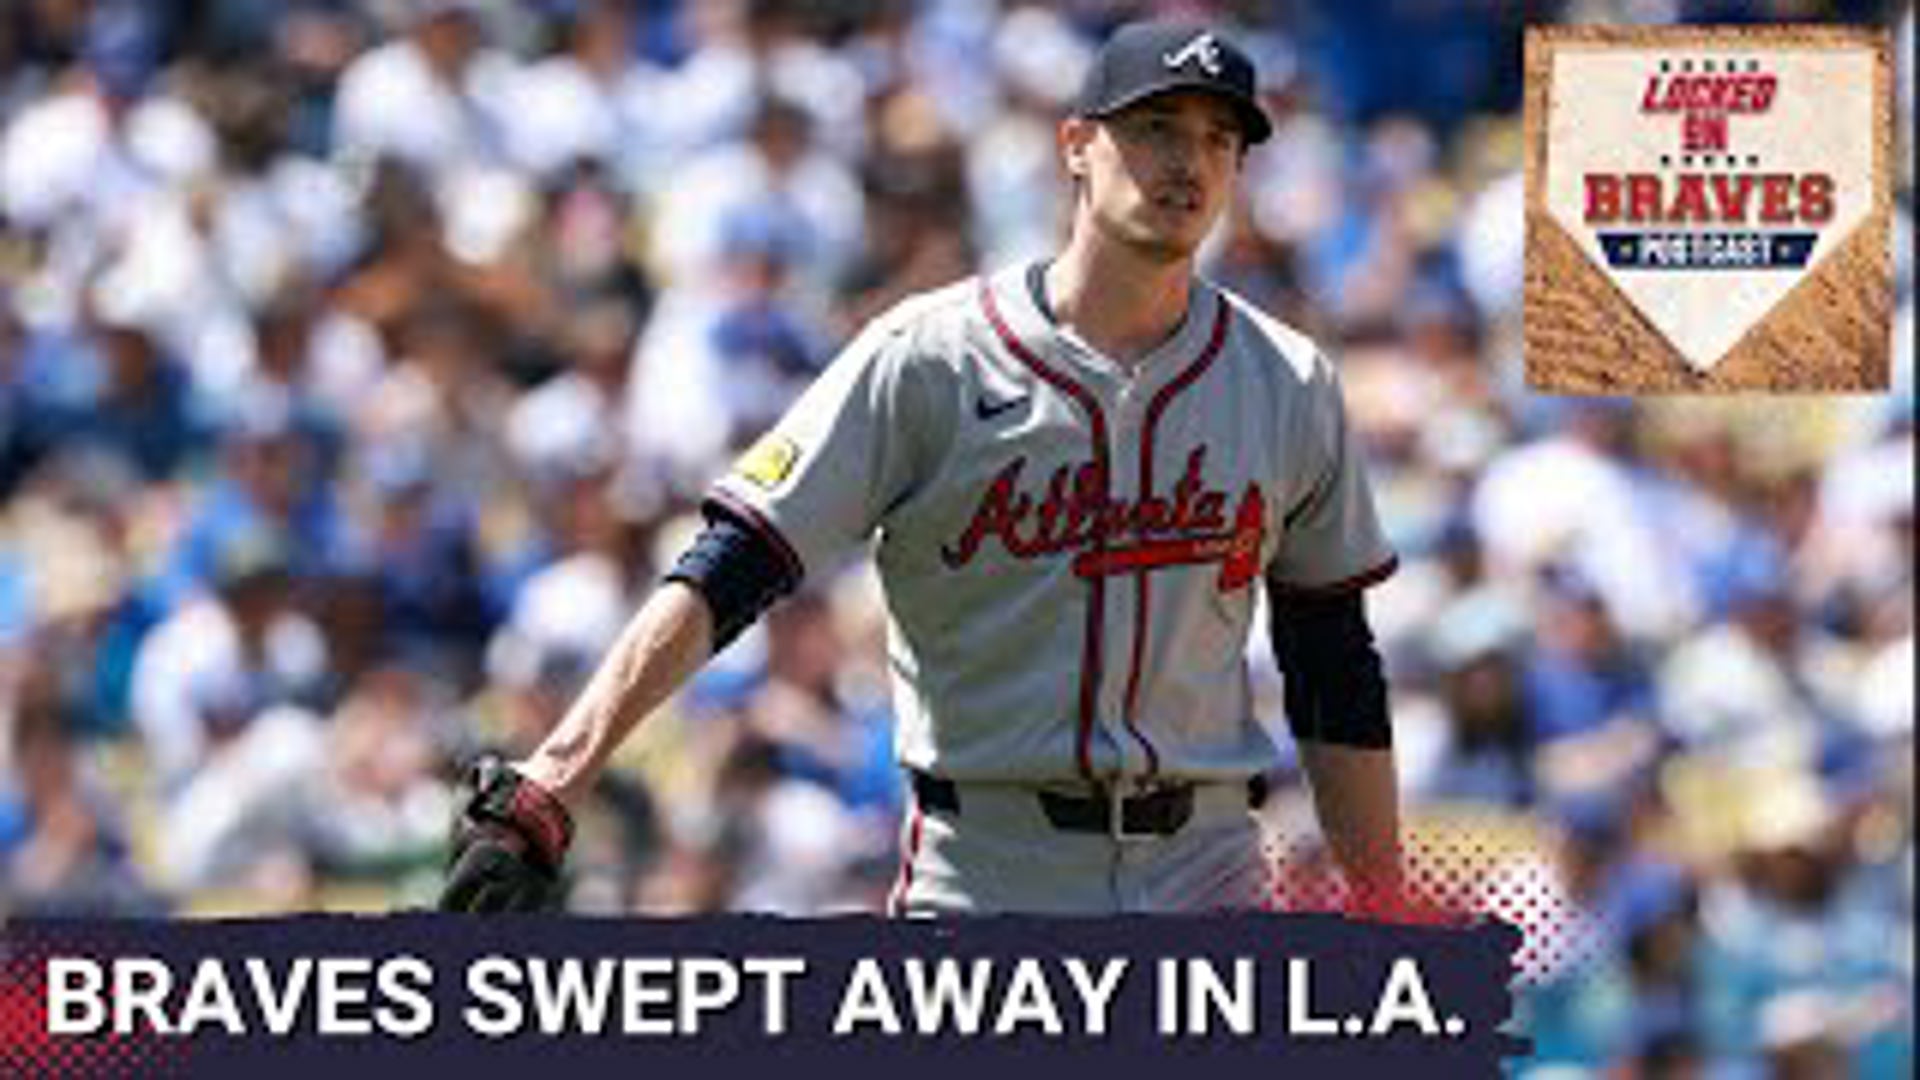 It was another quiet day for the Atlanta Braves at the plate and the end result was a 5-1 loss that capped a series sweep at the hands of the Los Angeles Dodgers.